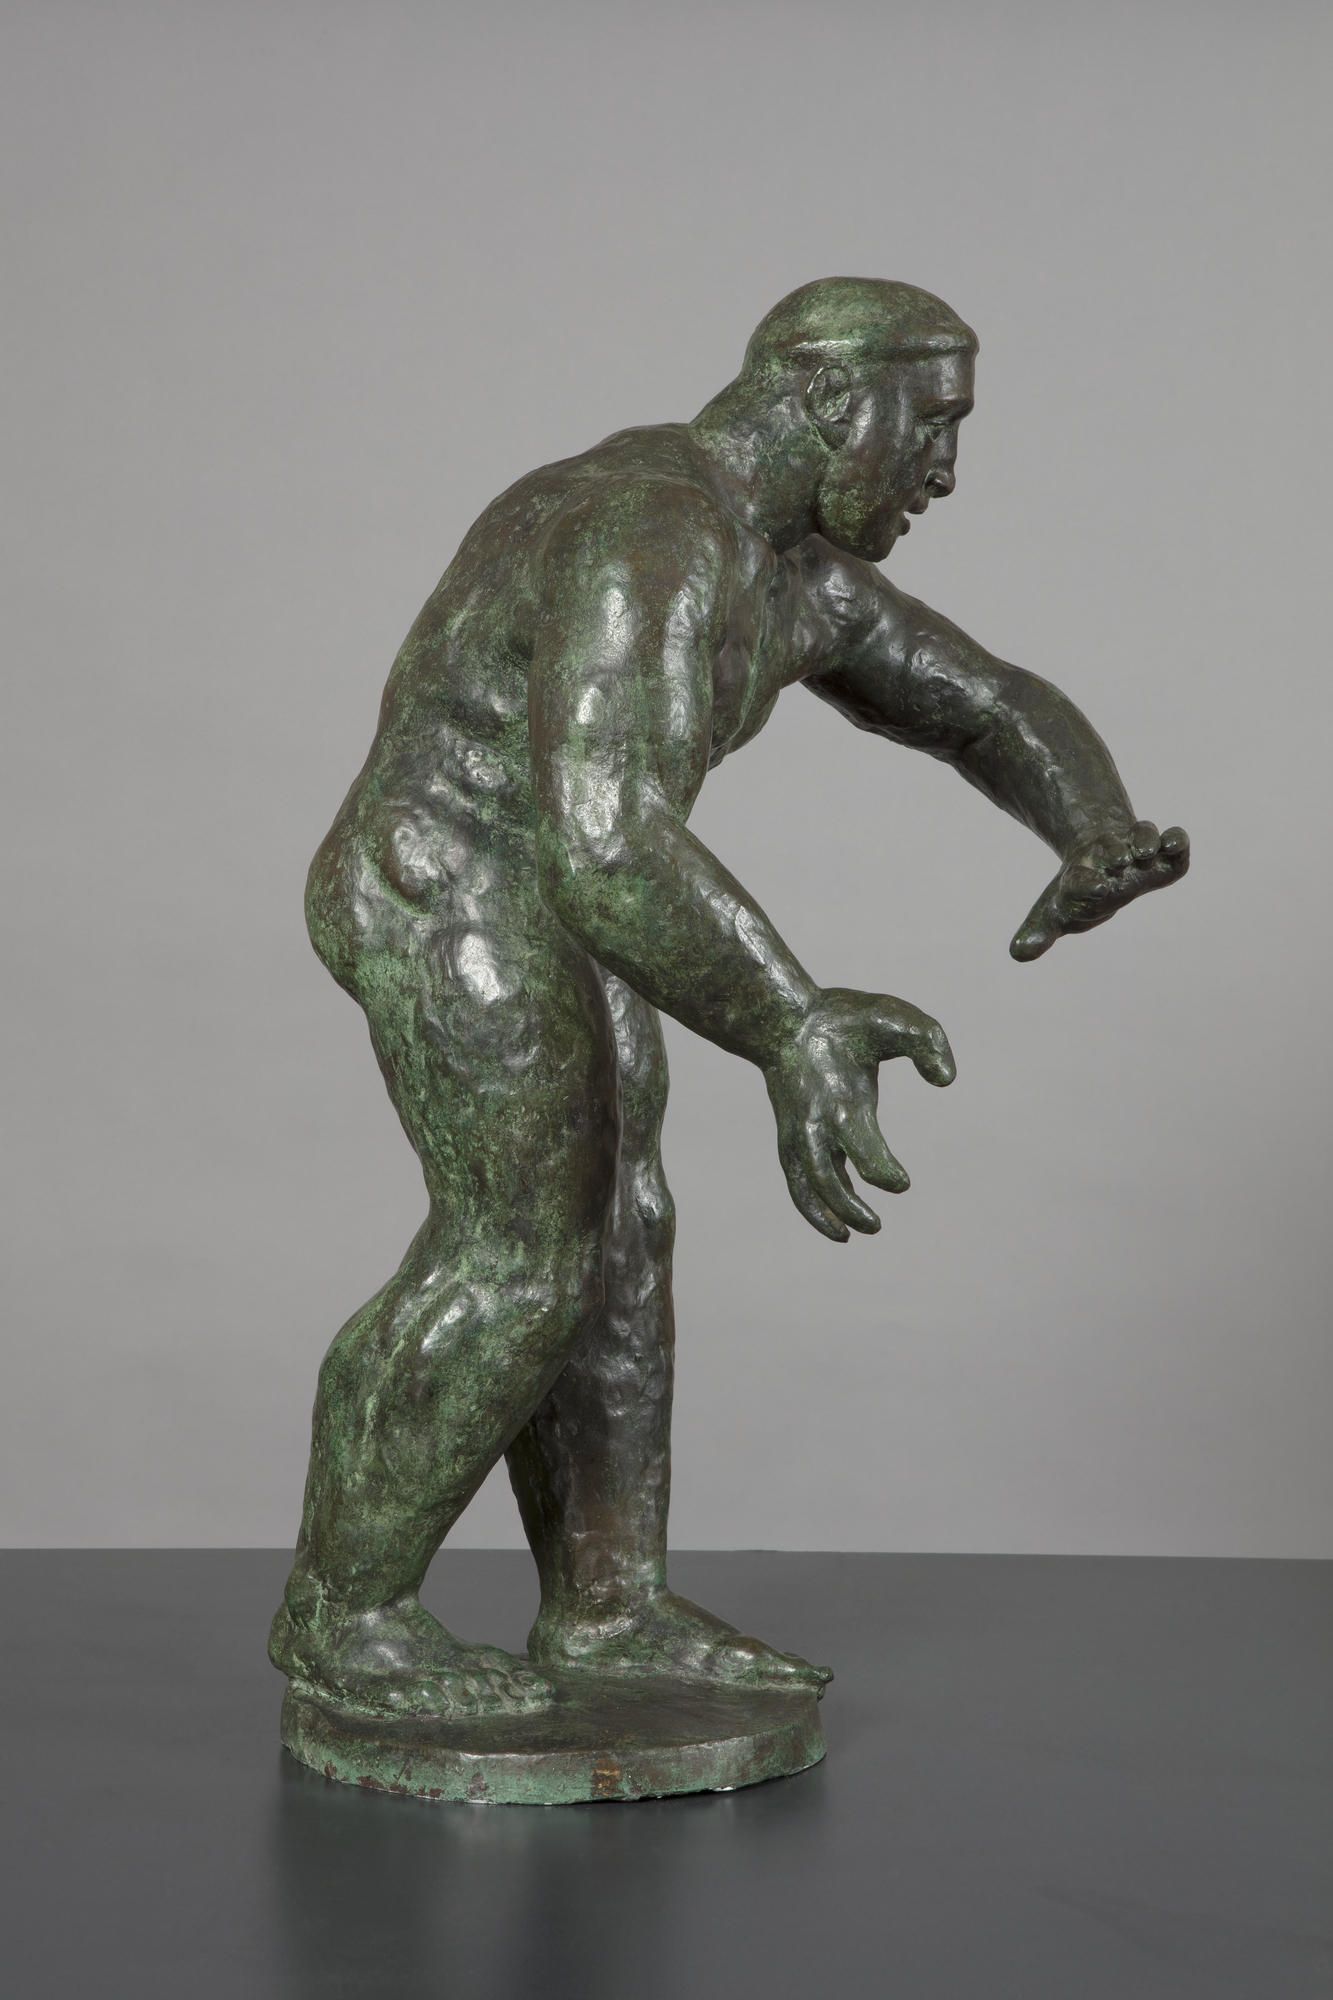 A bronze sculpture of a naked man shown as well-muscled wrestler facing right, with thick legs and arms, who leans inwards with hands poised as if to grapple an opponent.